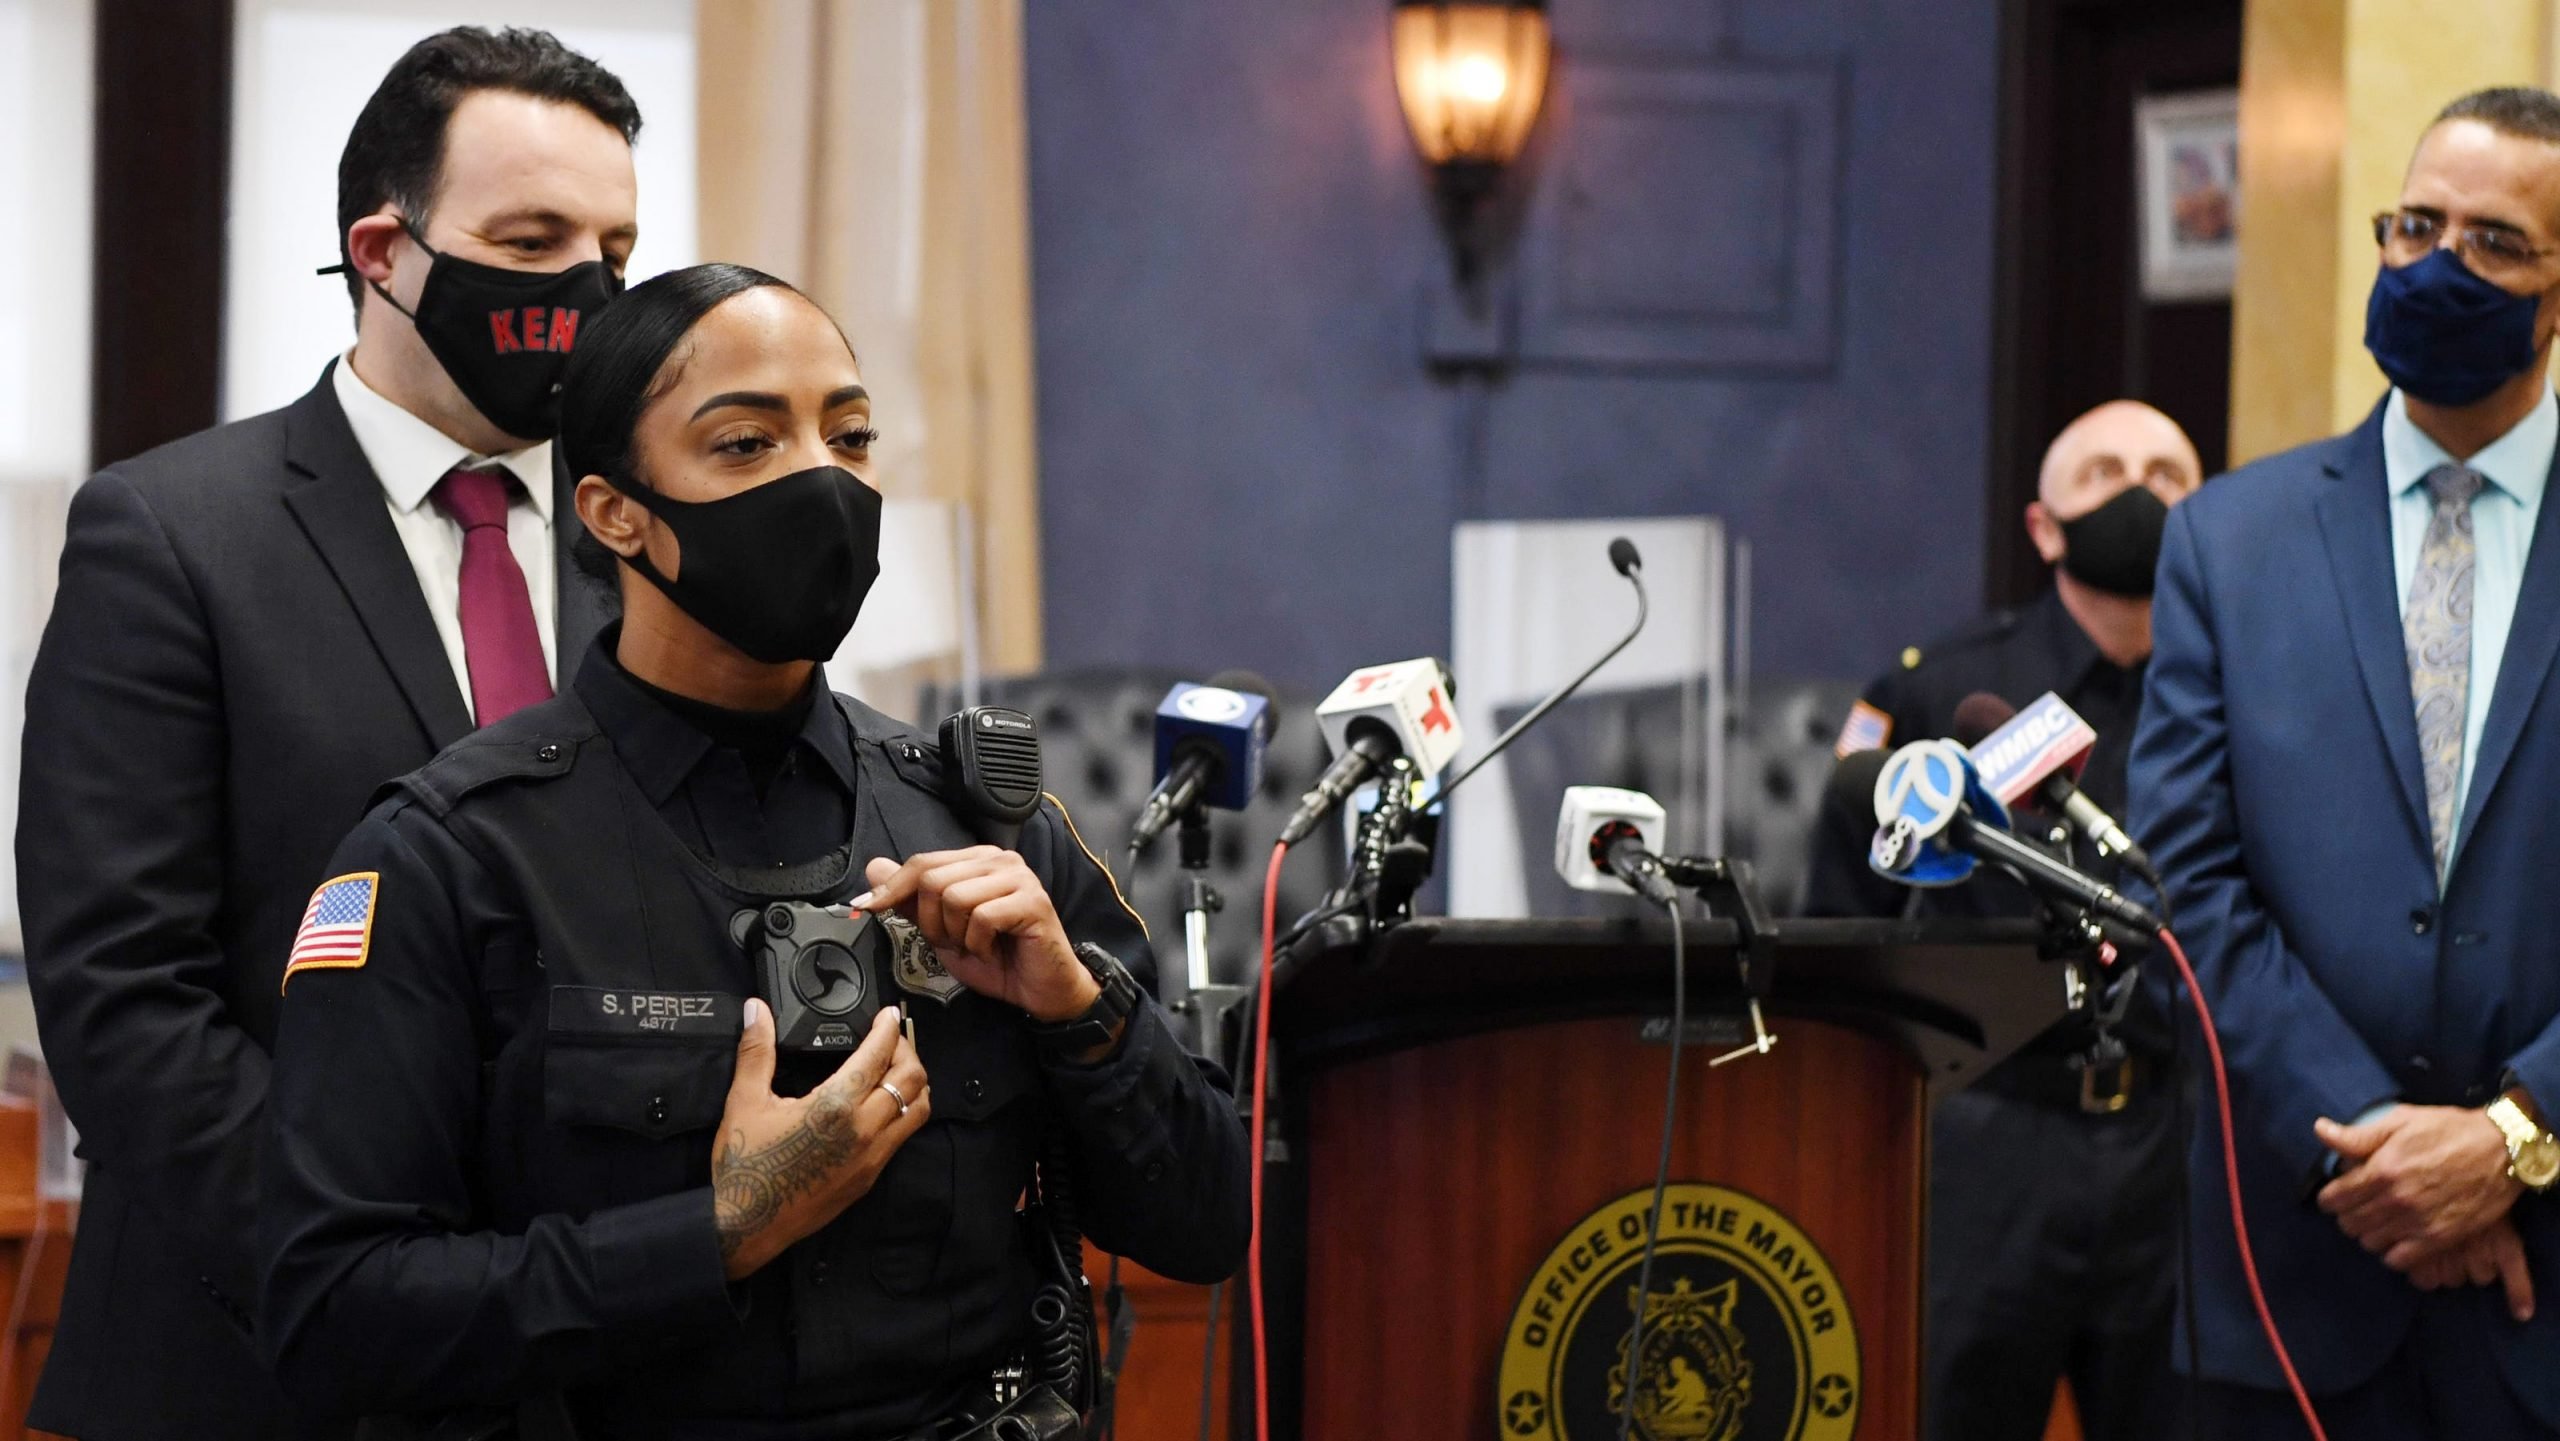 Paterson NJ police officers now wearing body cameras